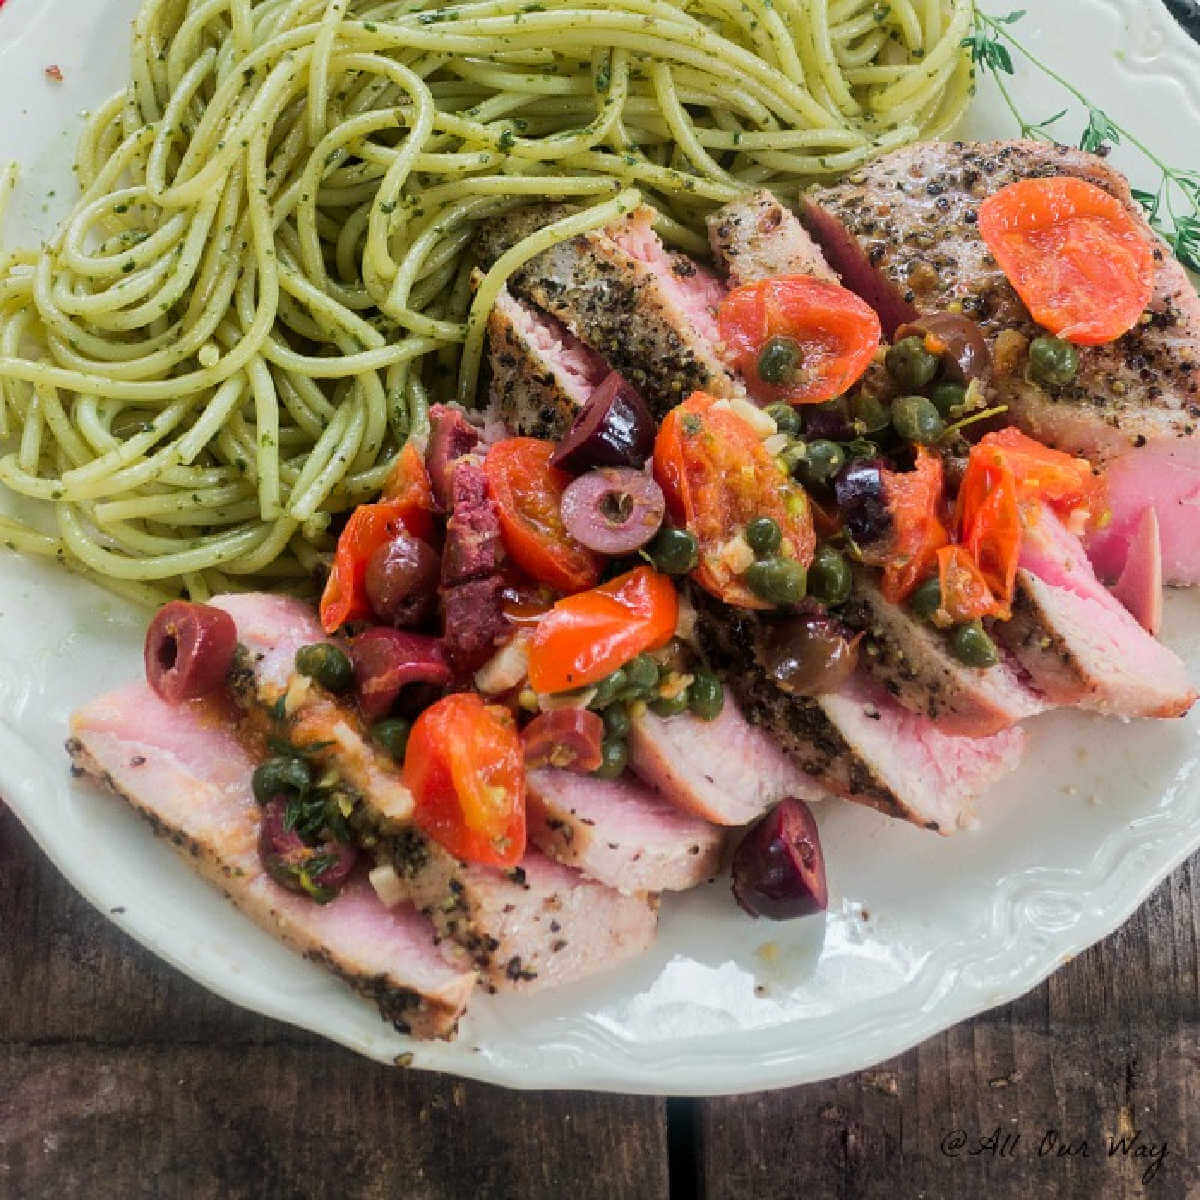 Southern Italian Grilled Tuna Steaks with a fresh grape tomato and black olive sauce to top the delicious sliced medium rare tuna along with green pesto pasta.